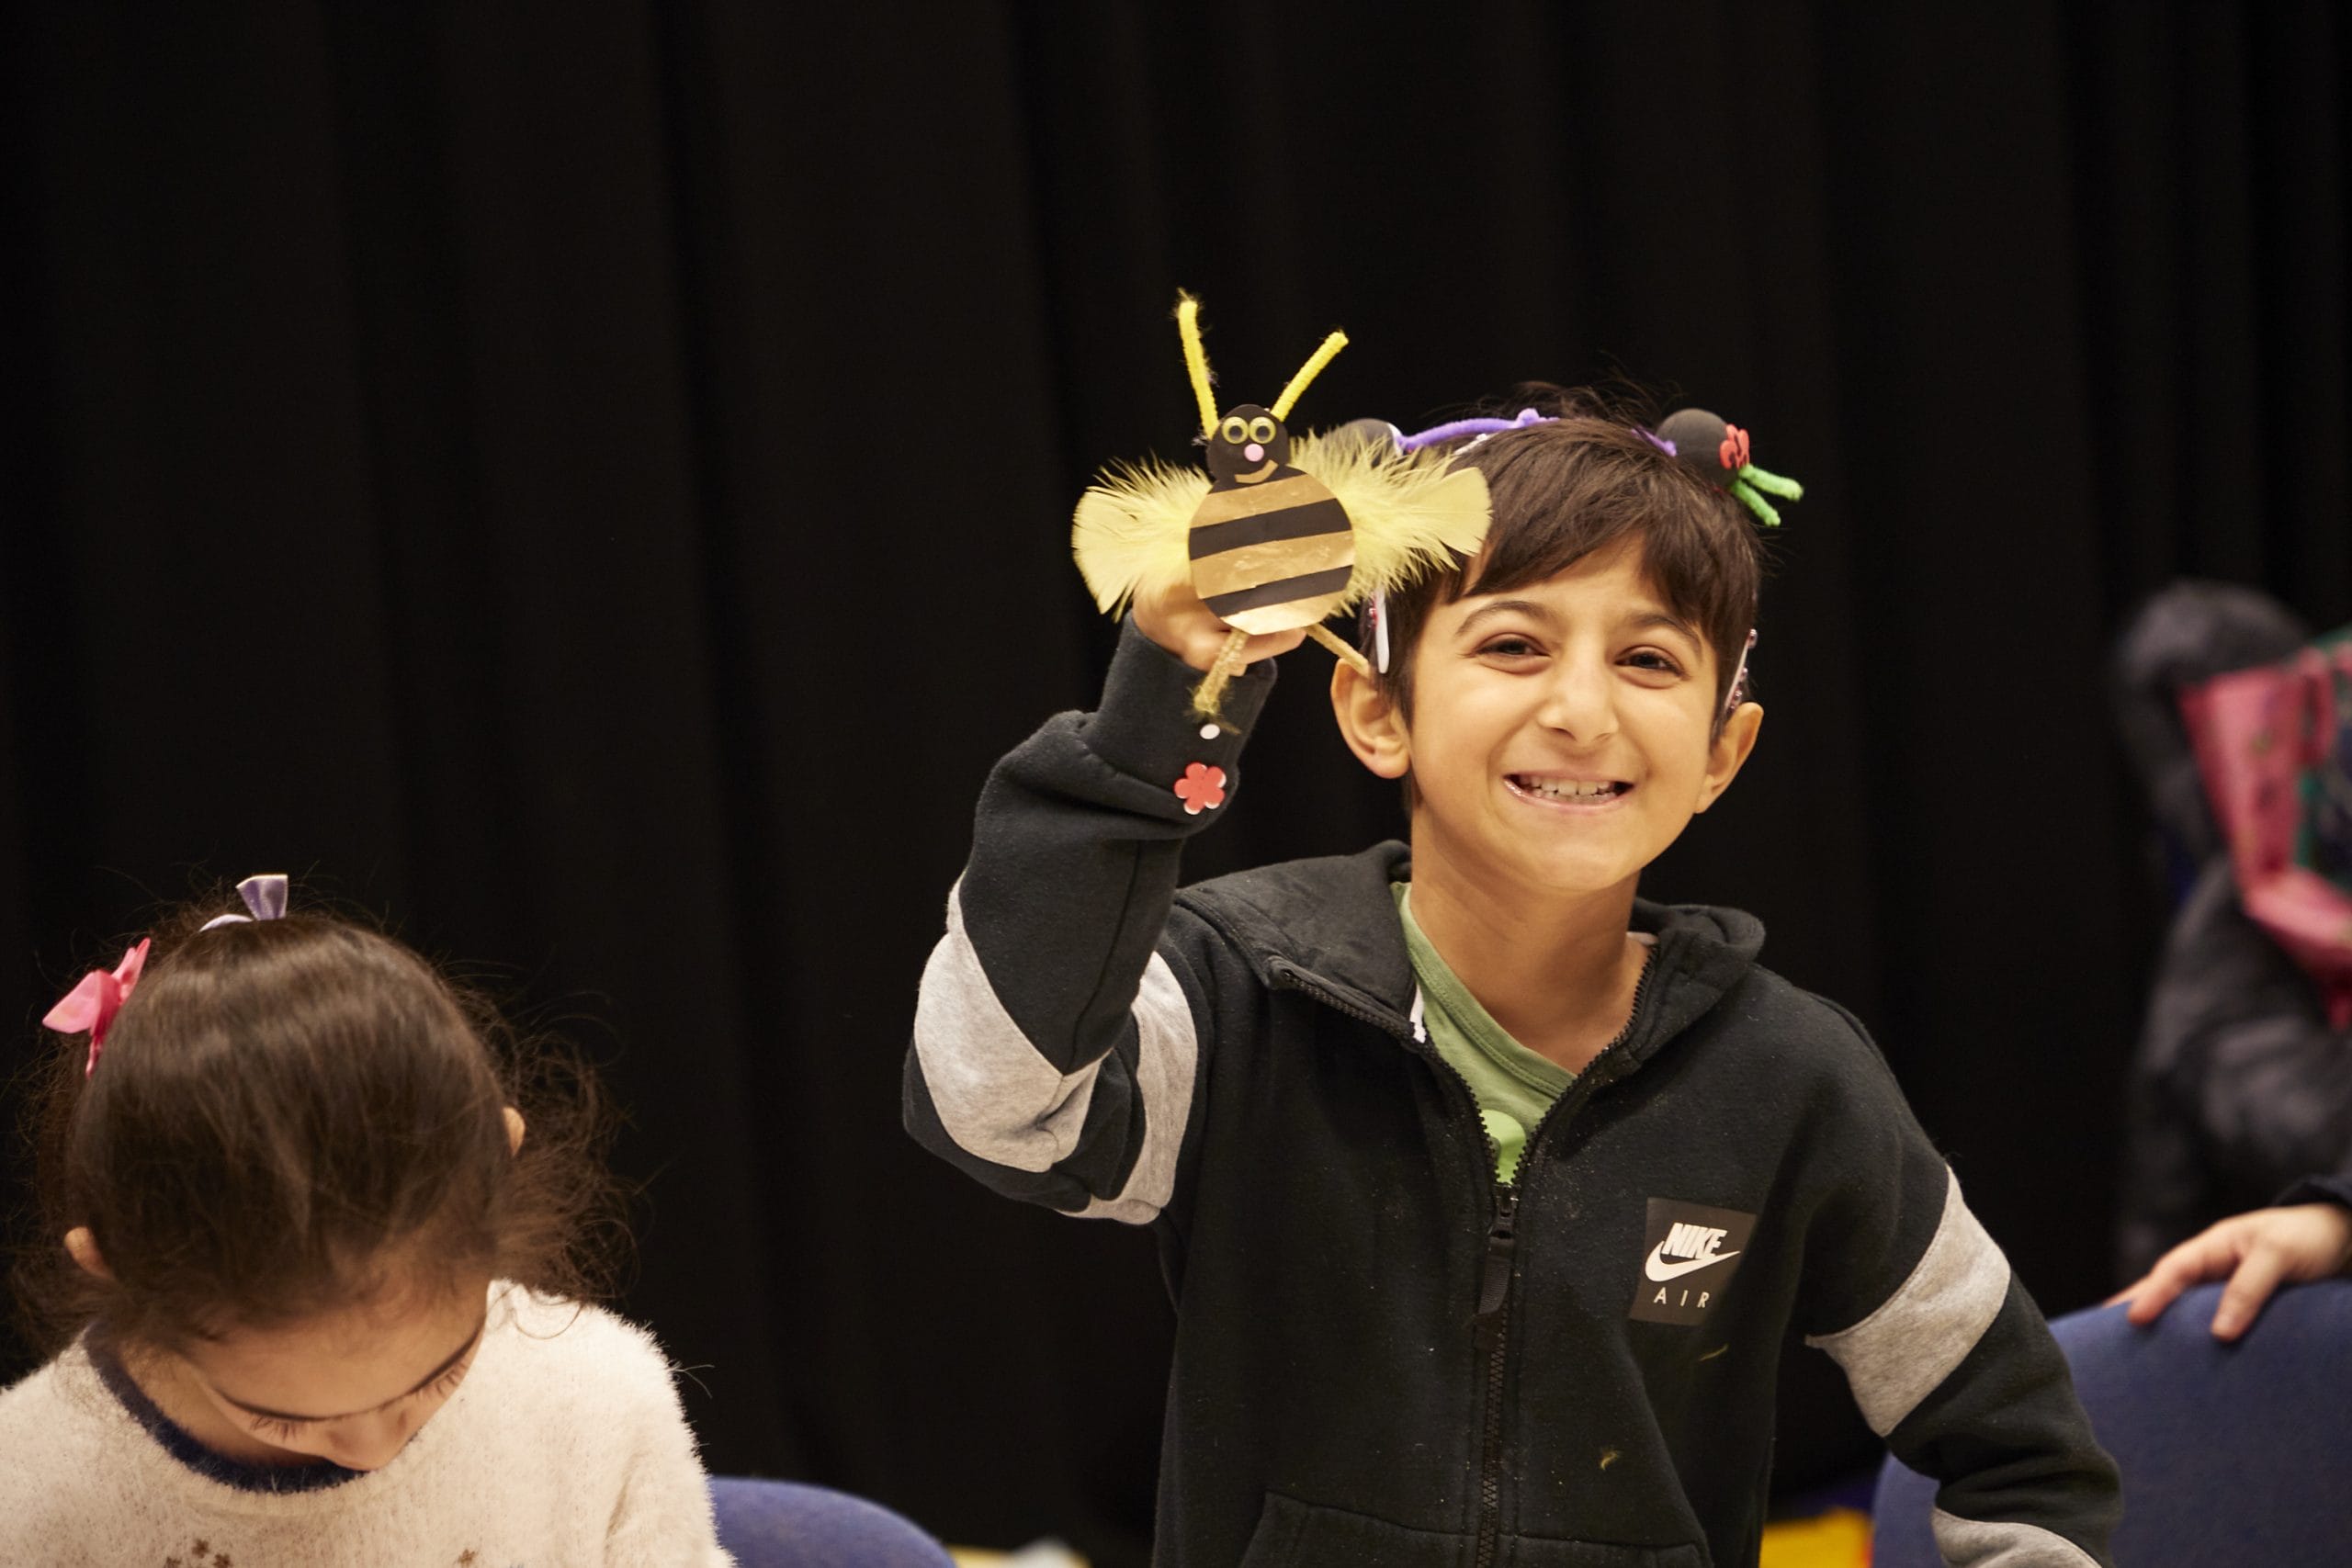 A boy holds up a handmade bumble bee